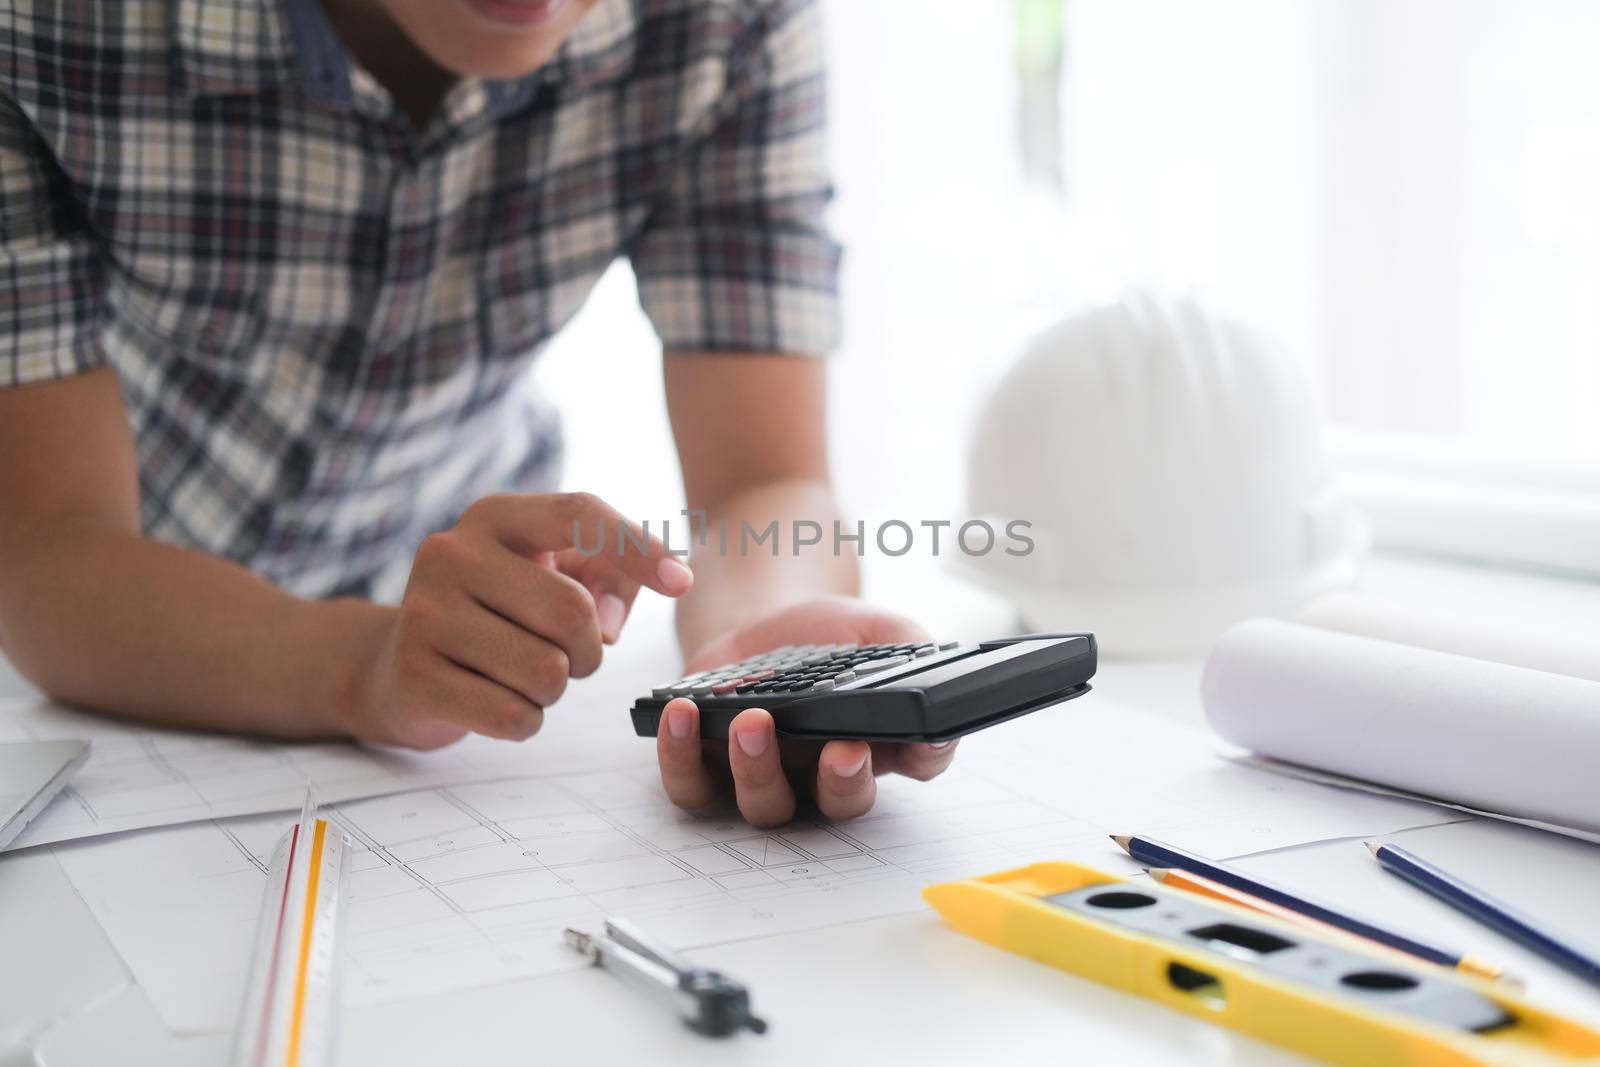 Young man was designing a building or architecture with a ruler, pen, pencil, tape measure, architect hat and other equipment.